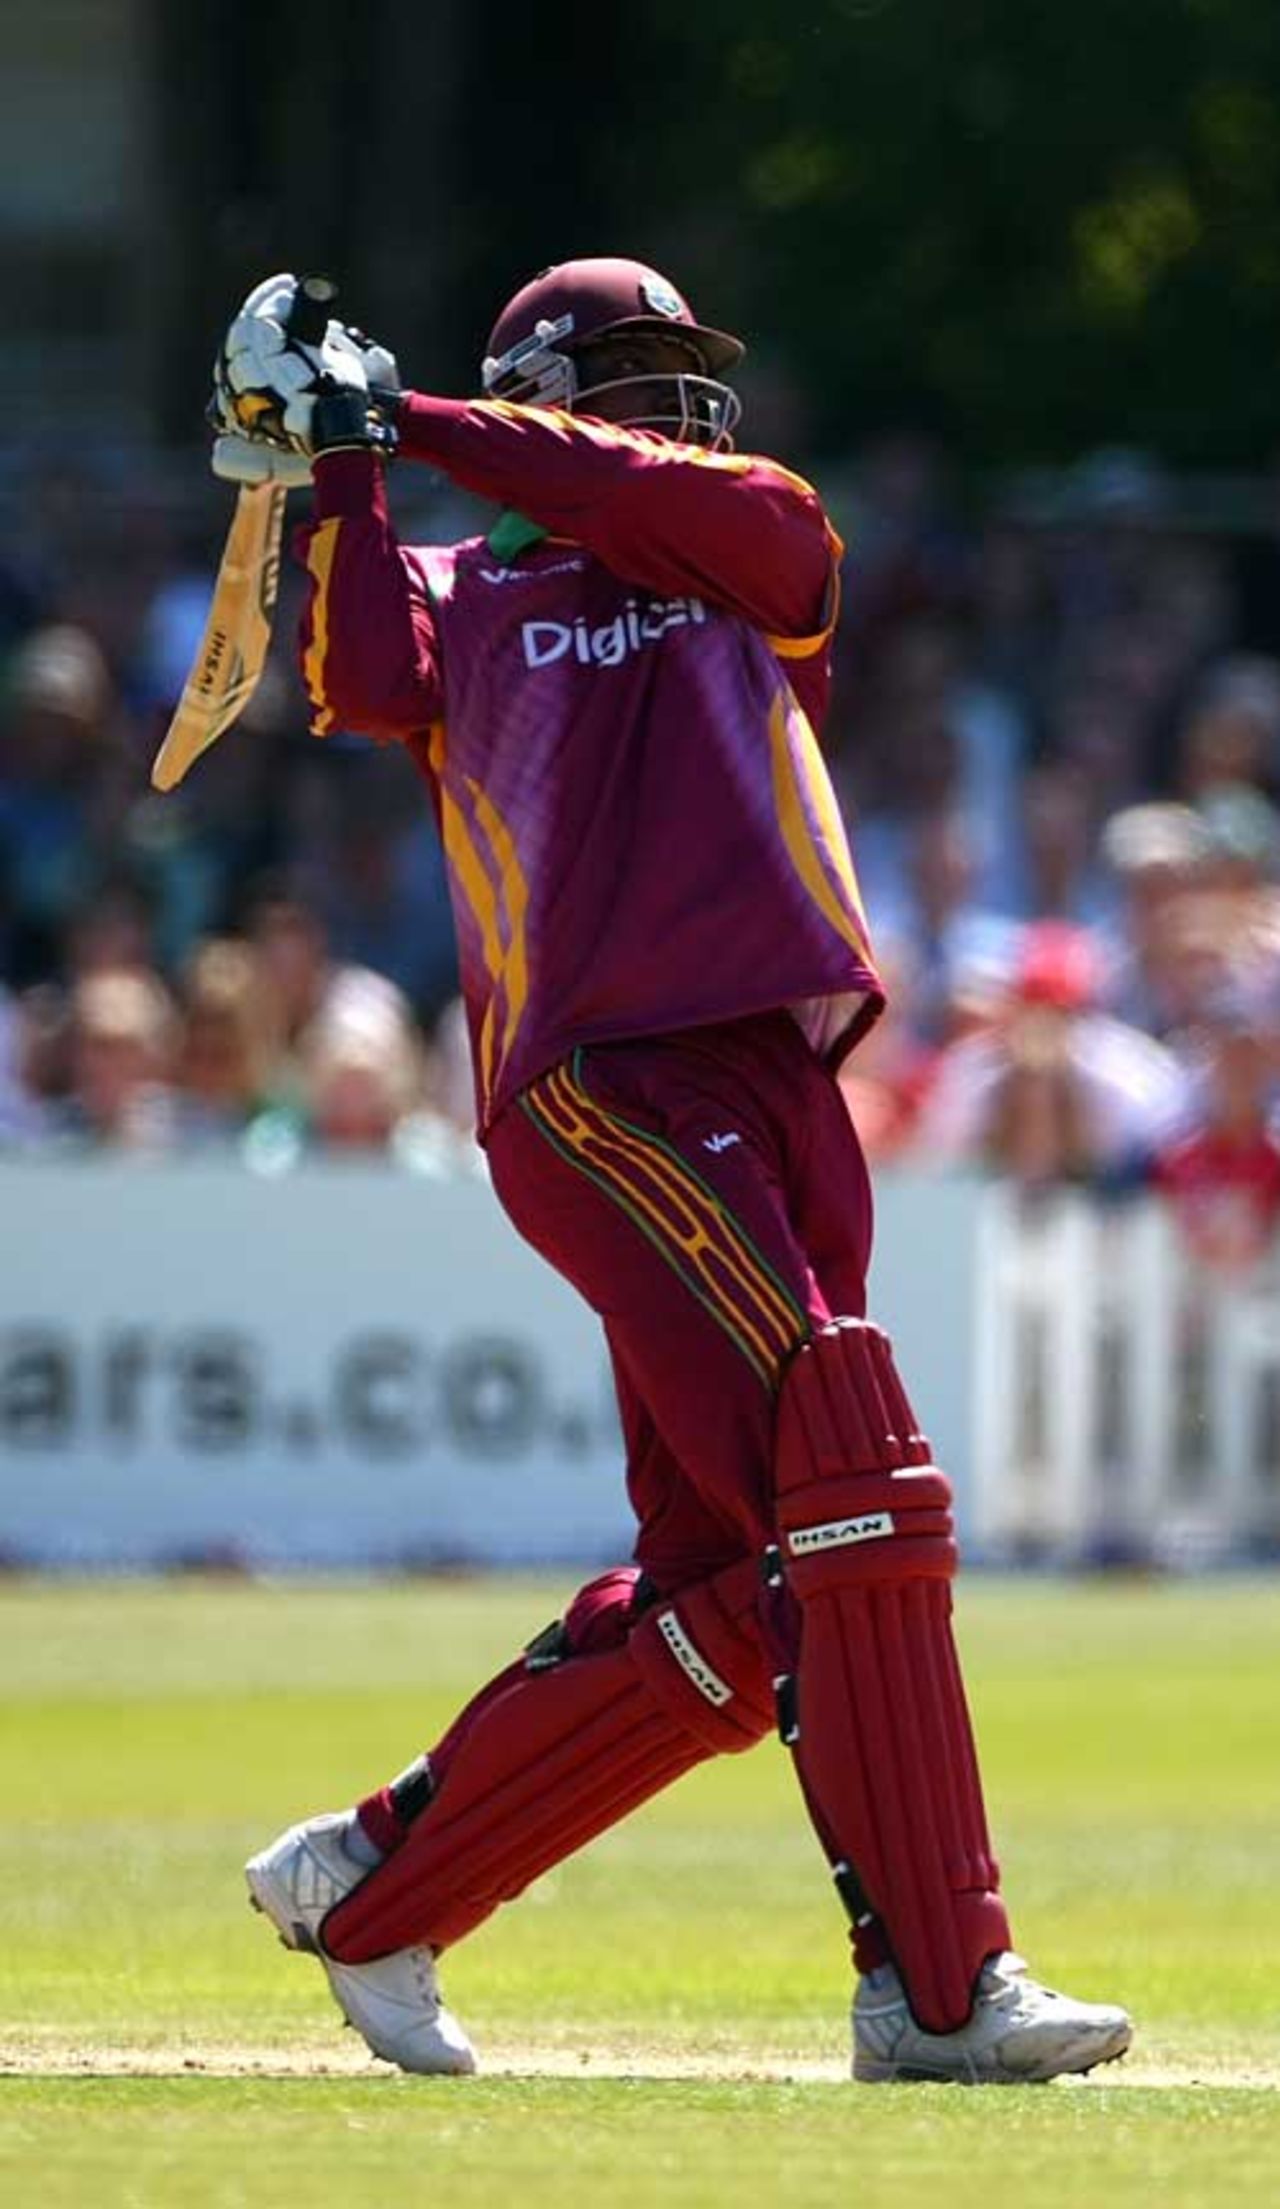 Chris Gayle launches a six over the leg side, England v West Indies, 2nd ODI, Bristol, May 24, 2009